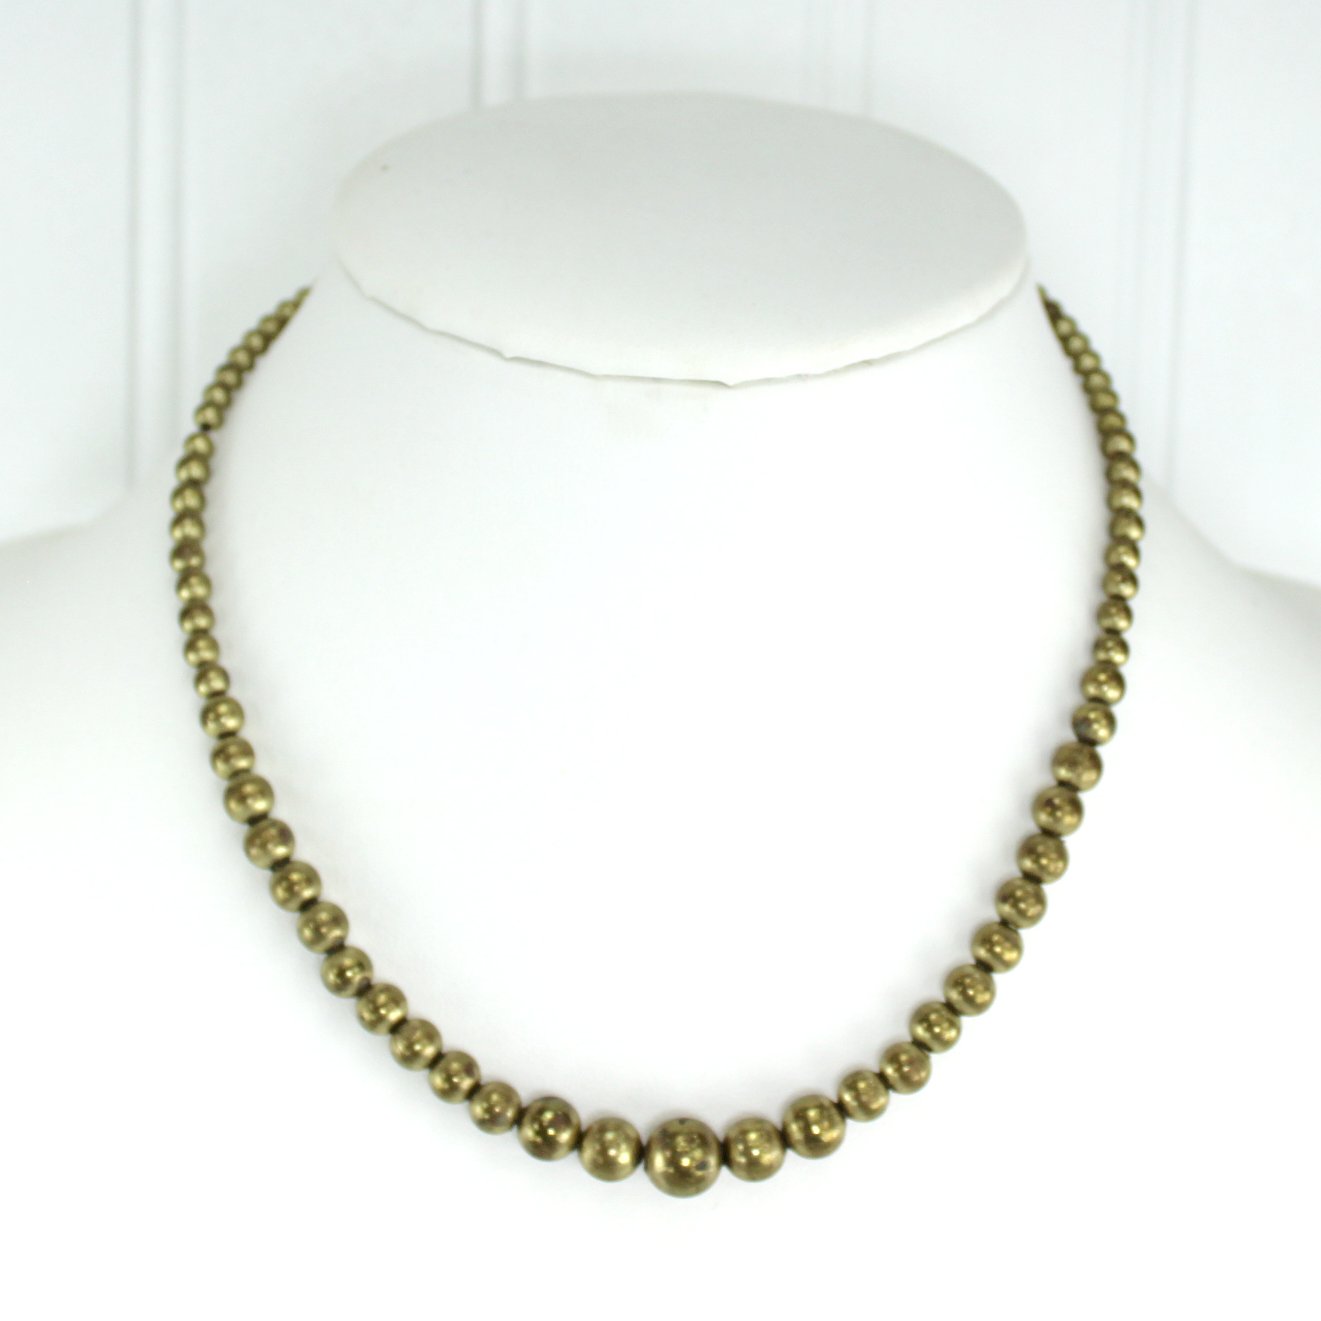 Brass Bead Necklace 1940s Graduated Size Chain Strung neck view